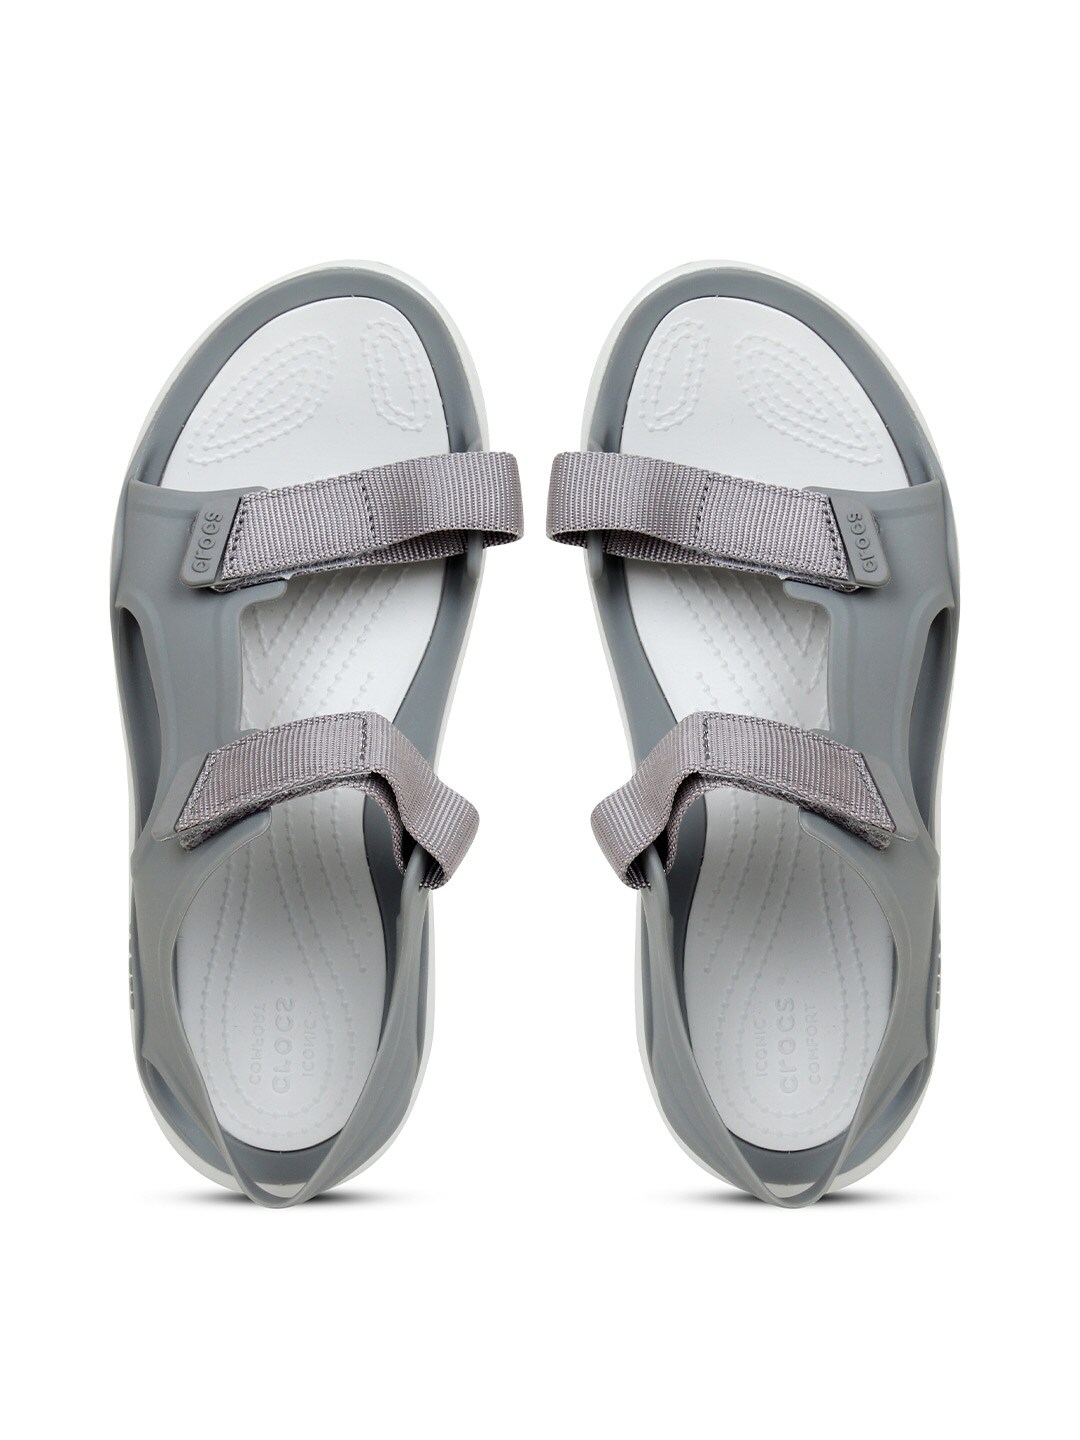 Crocs Women Grey Swiftwater Expedition Sports Sandals Price in India